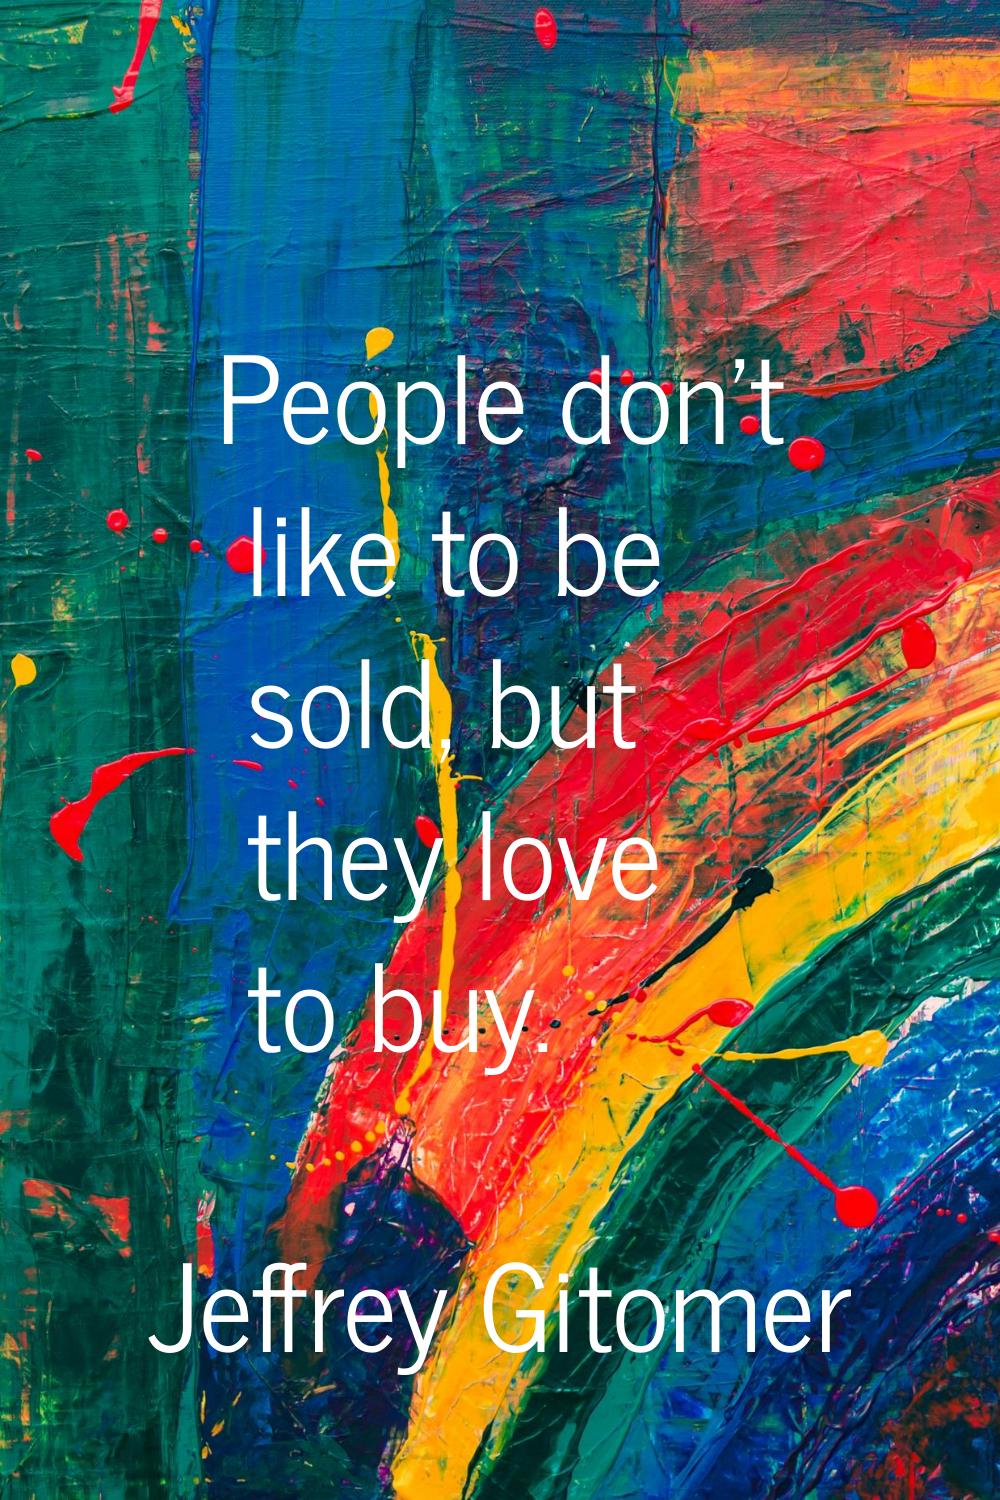 People don't like to be sold, but they love to buy.